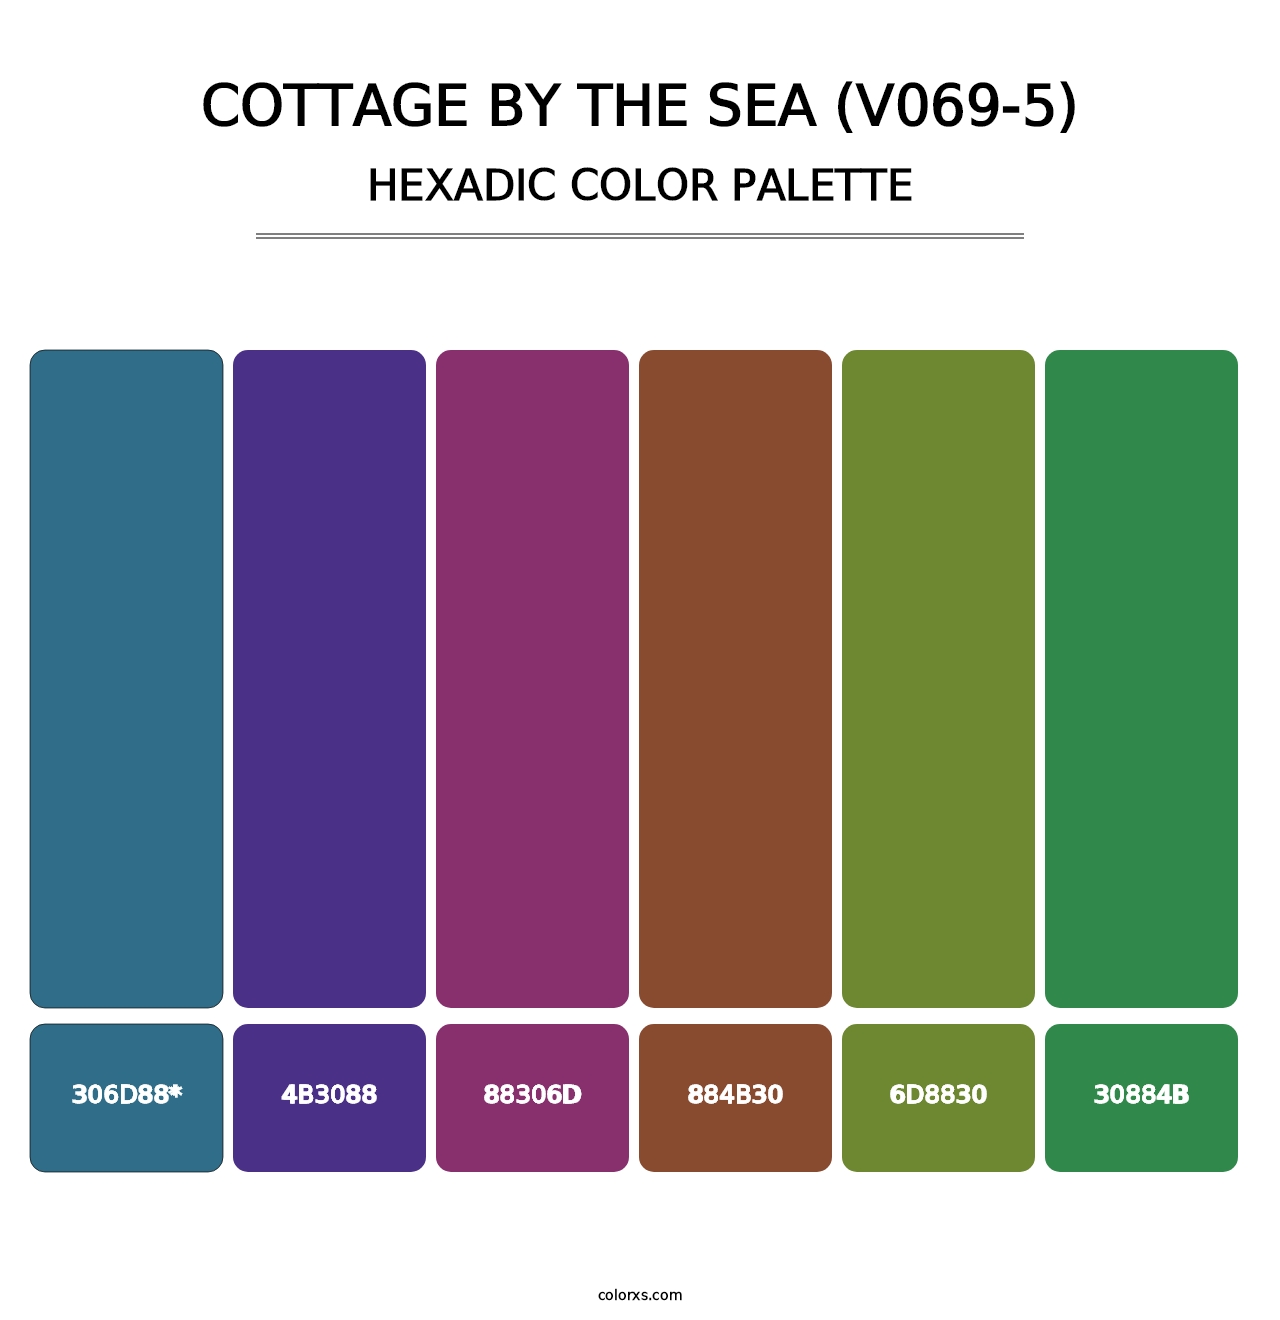 Cottage by the Sea (V069-5) - Hexadic Color Palette